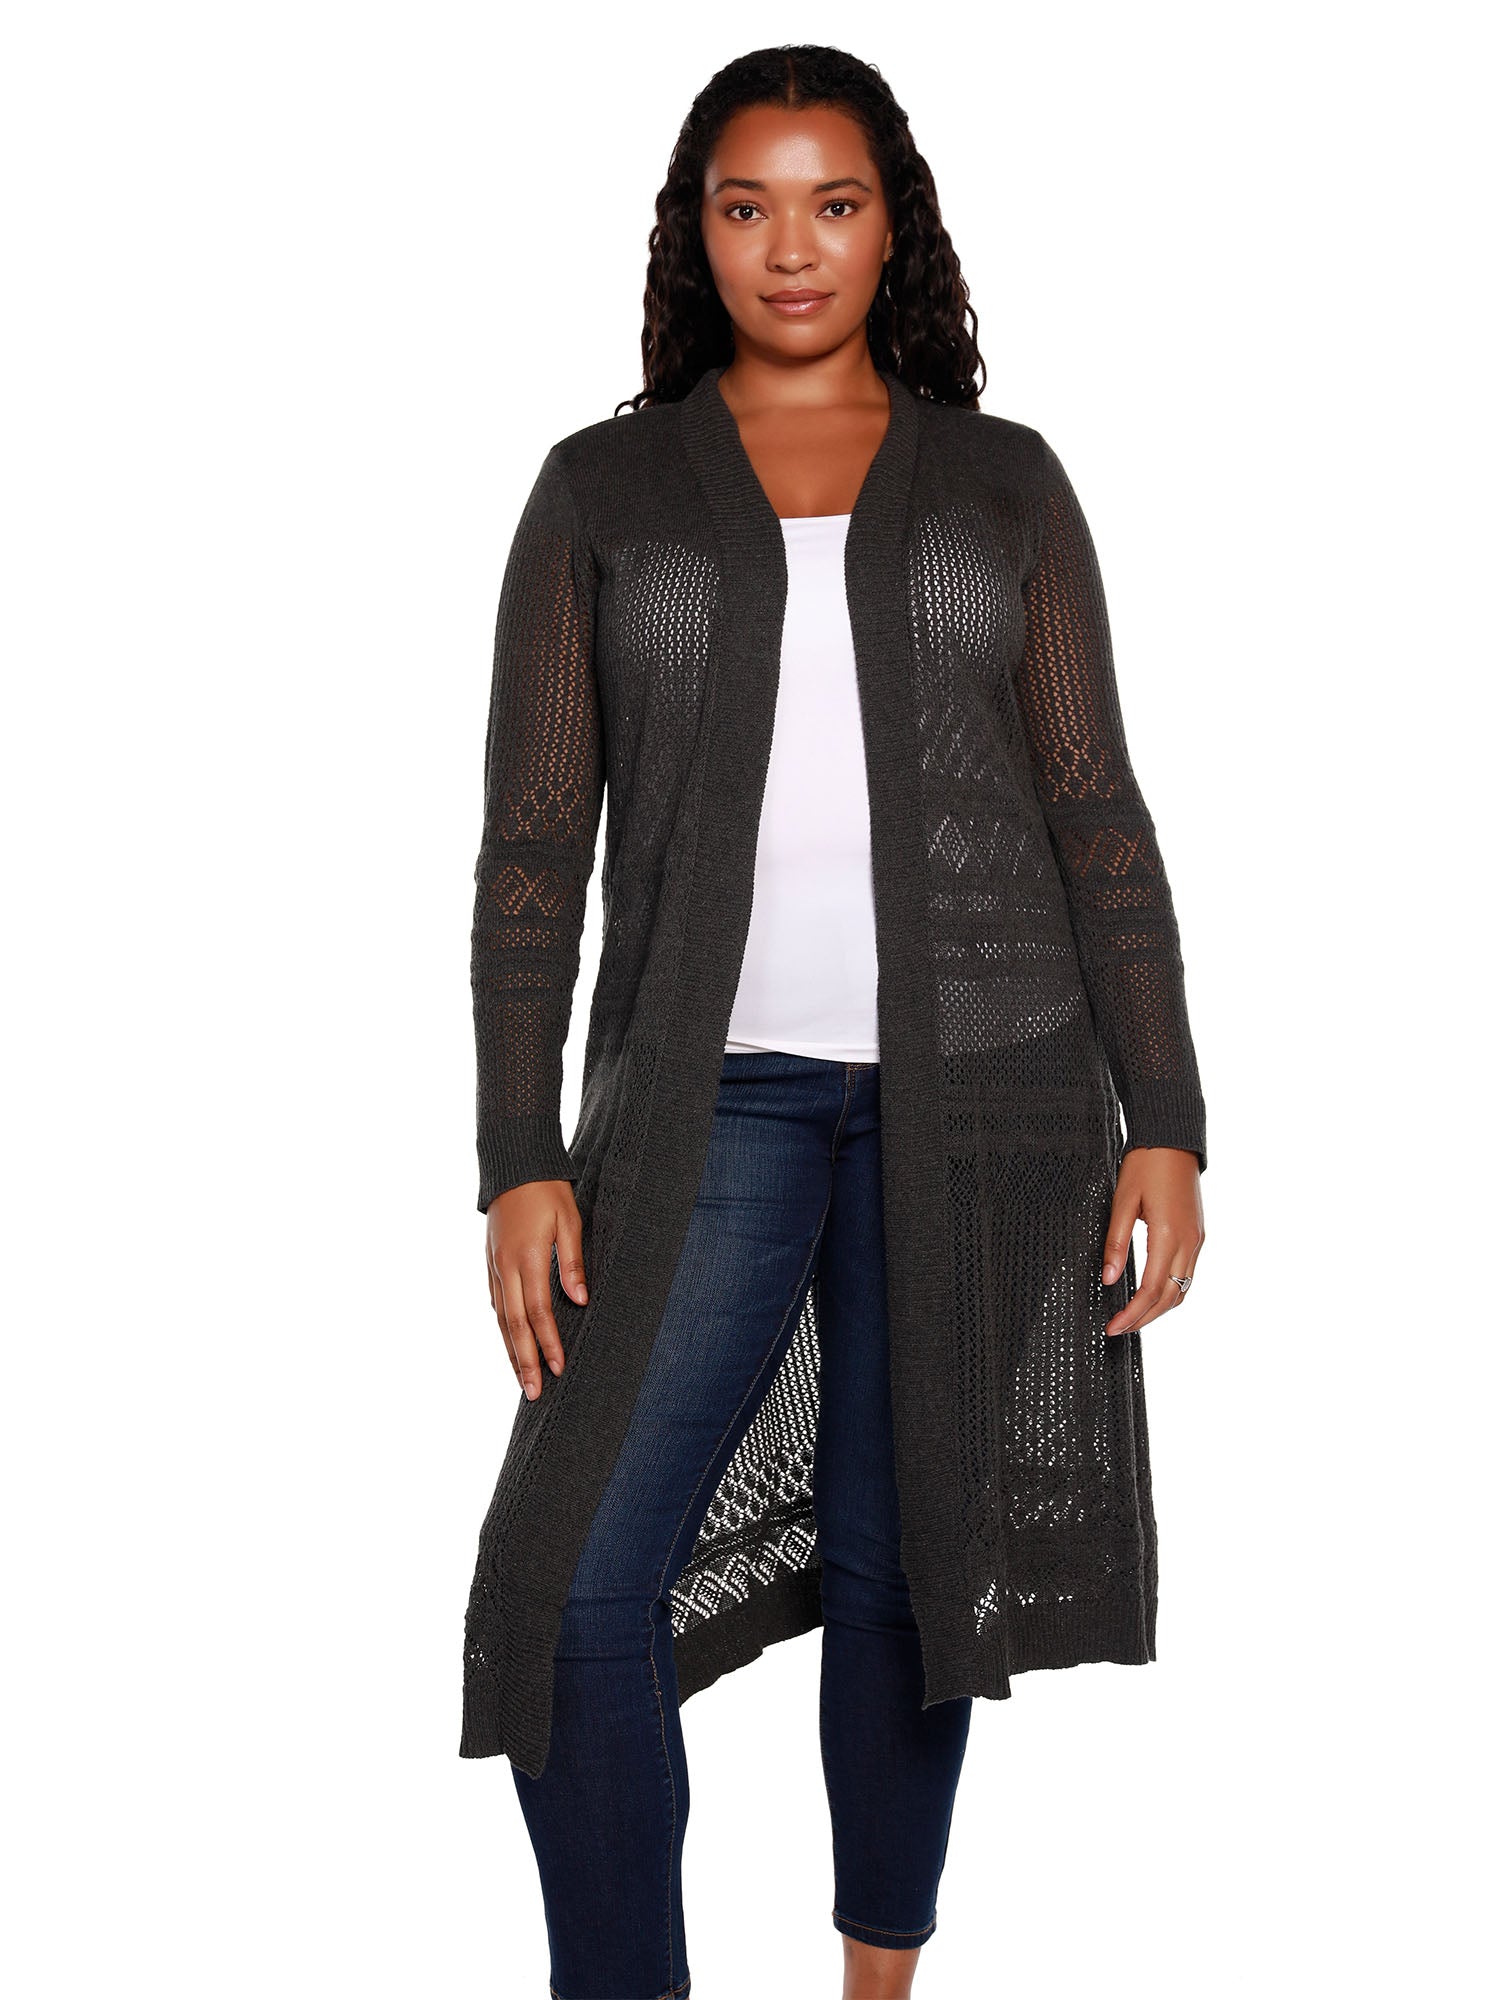 Women's Duster Cardigan in a Crochet Pointelle Stitch Long Sleeves and an Open Front  | Curvy